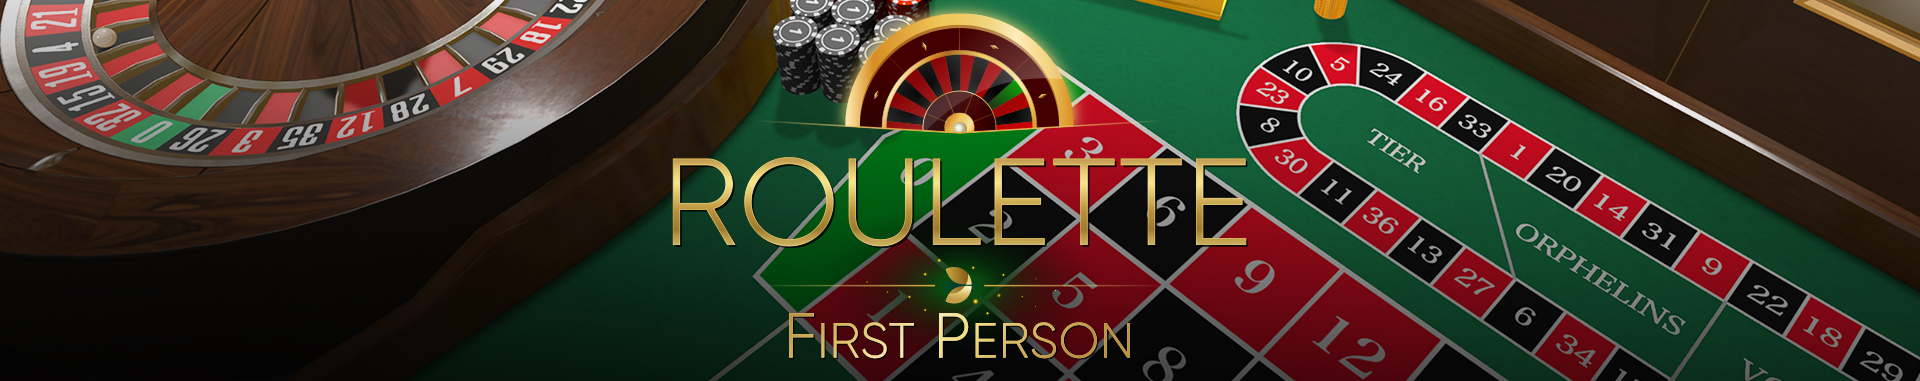 Roulette First Person